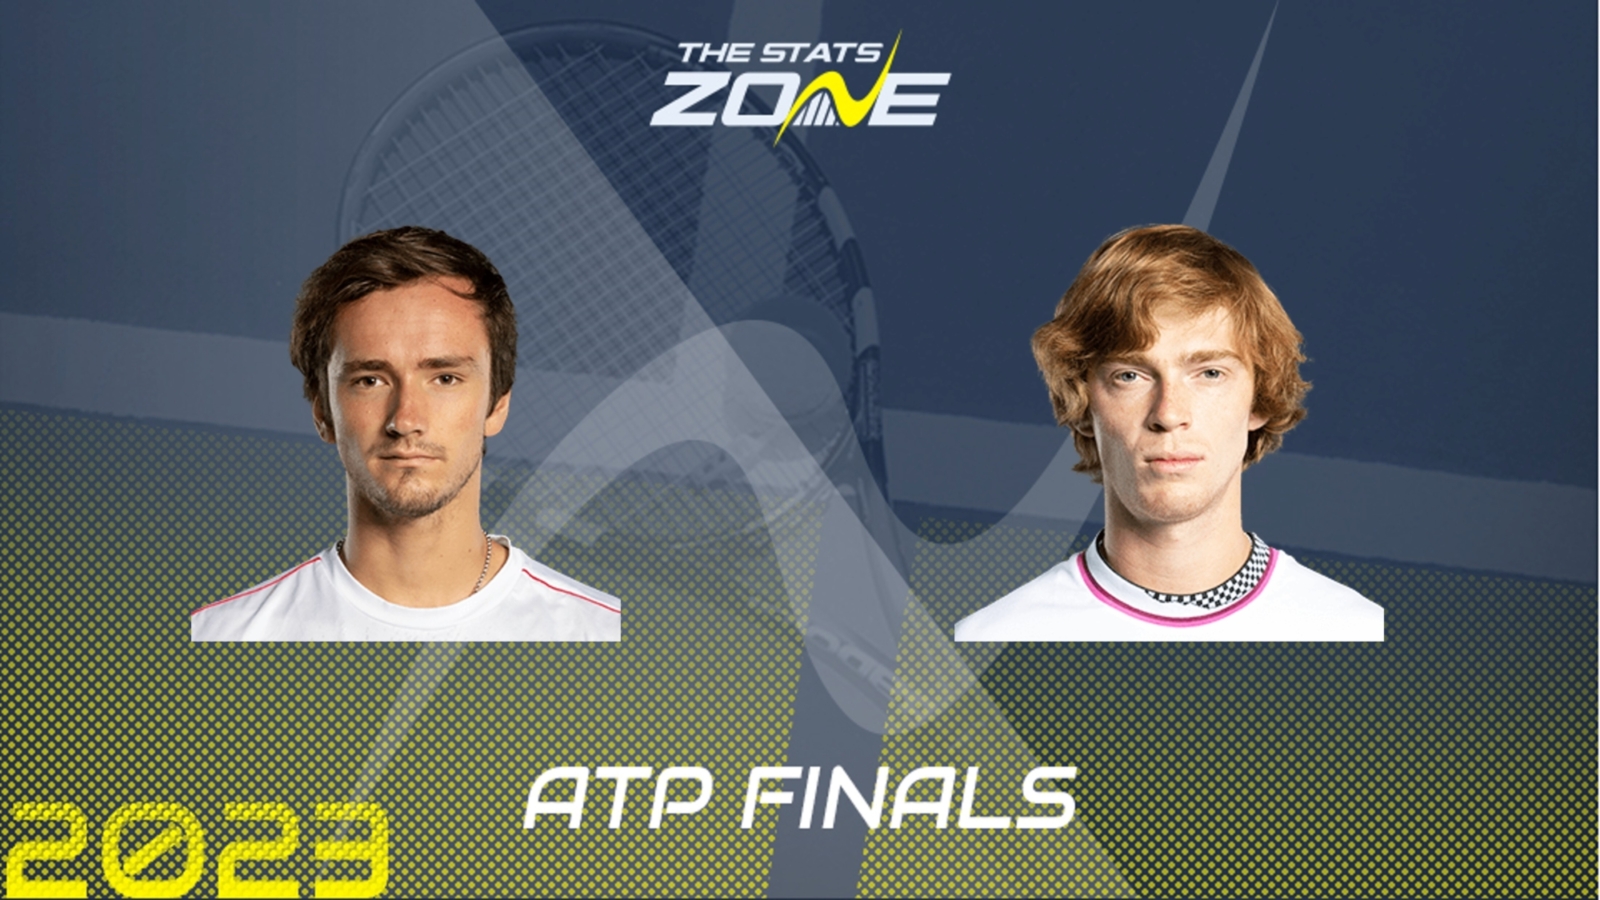 2023 ATP Masters Monte-Carlo Predictions and Free EXPERTS Betting Tips